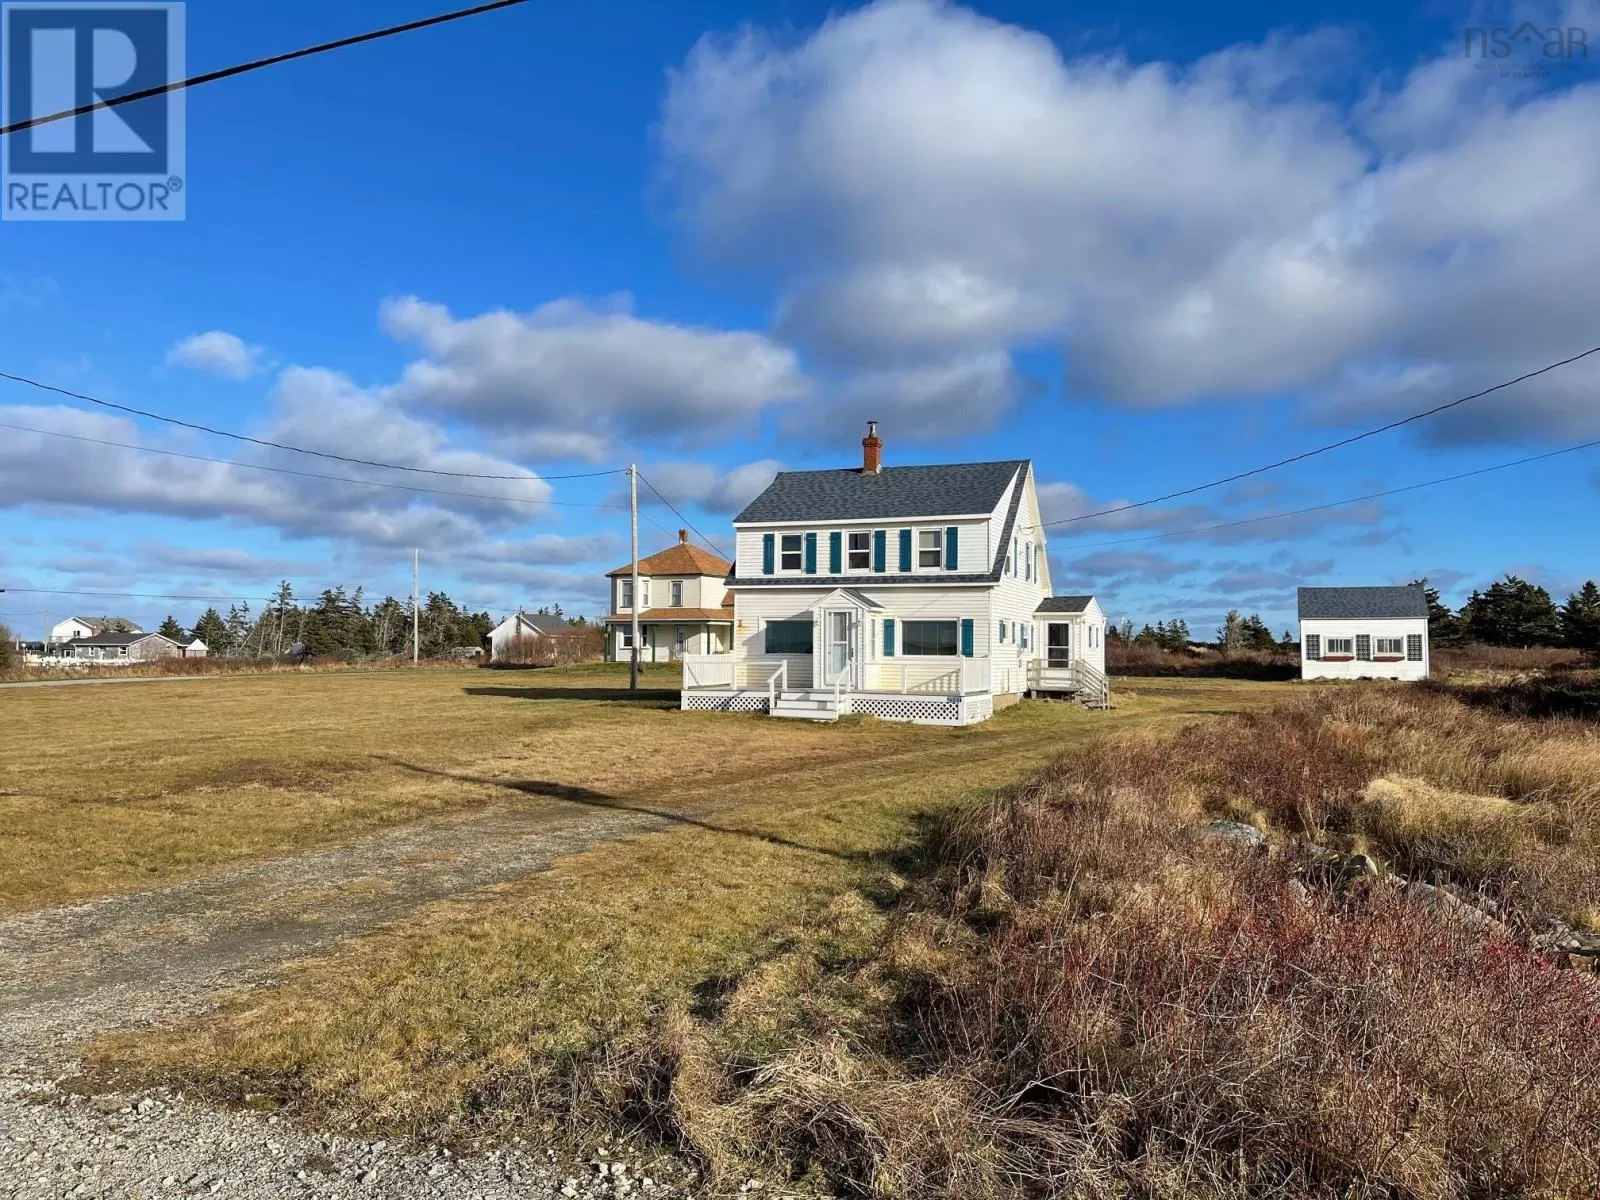 House for rent: 2507 Melbourne Road, Pinkneys Point, Nova Scotia B0W 1B0